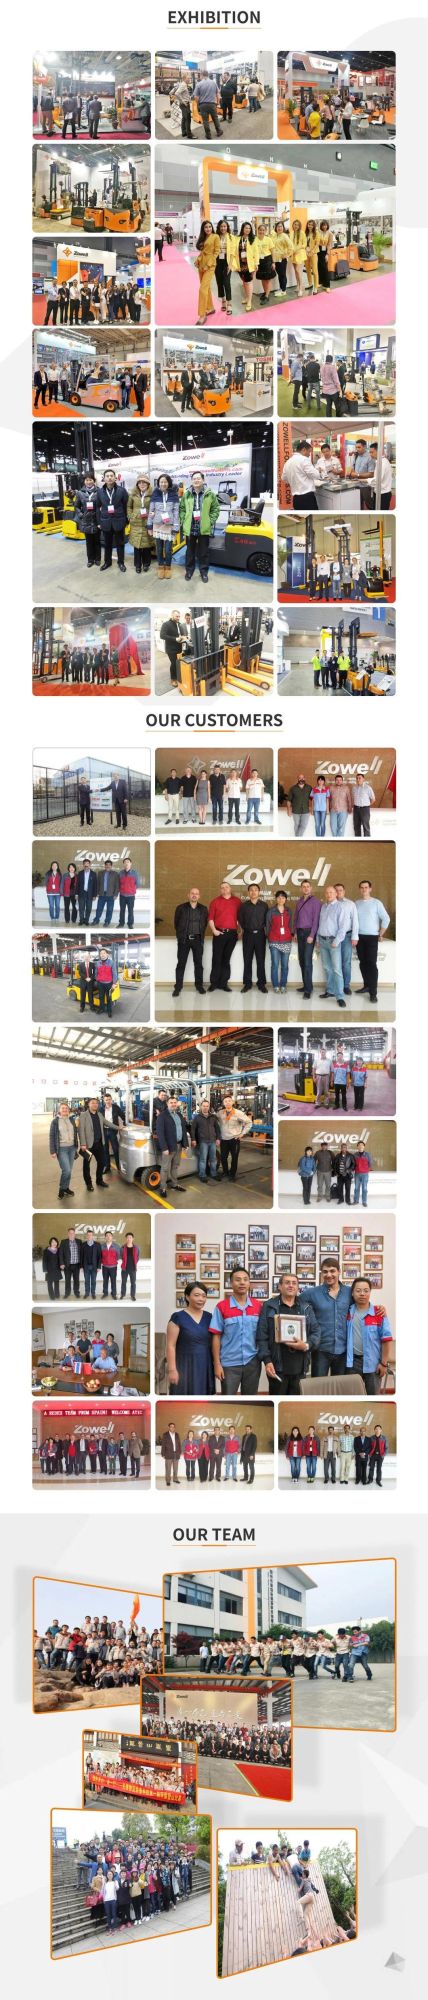 Zowell 2t 2.5t Adjustable Powered Pallet Truck Electric Forklift Pallet Lifter